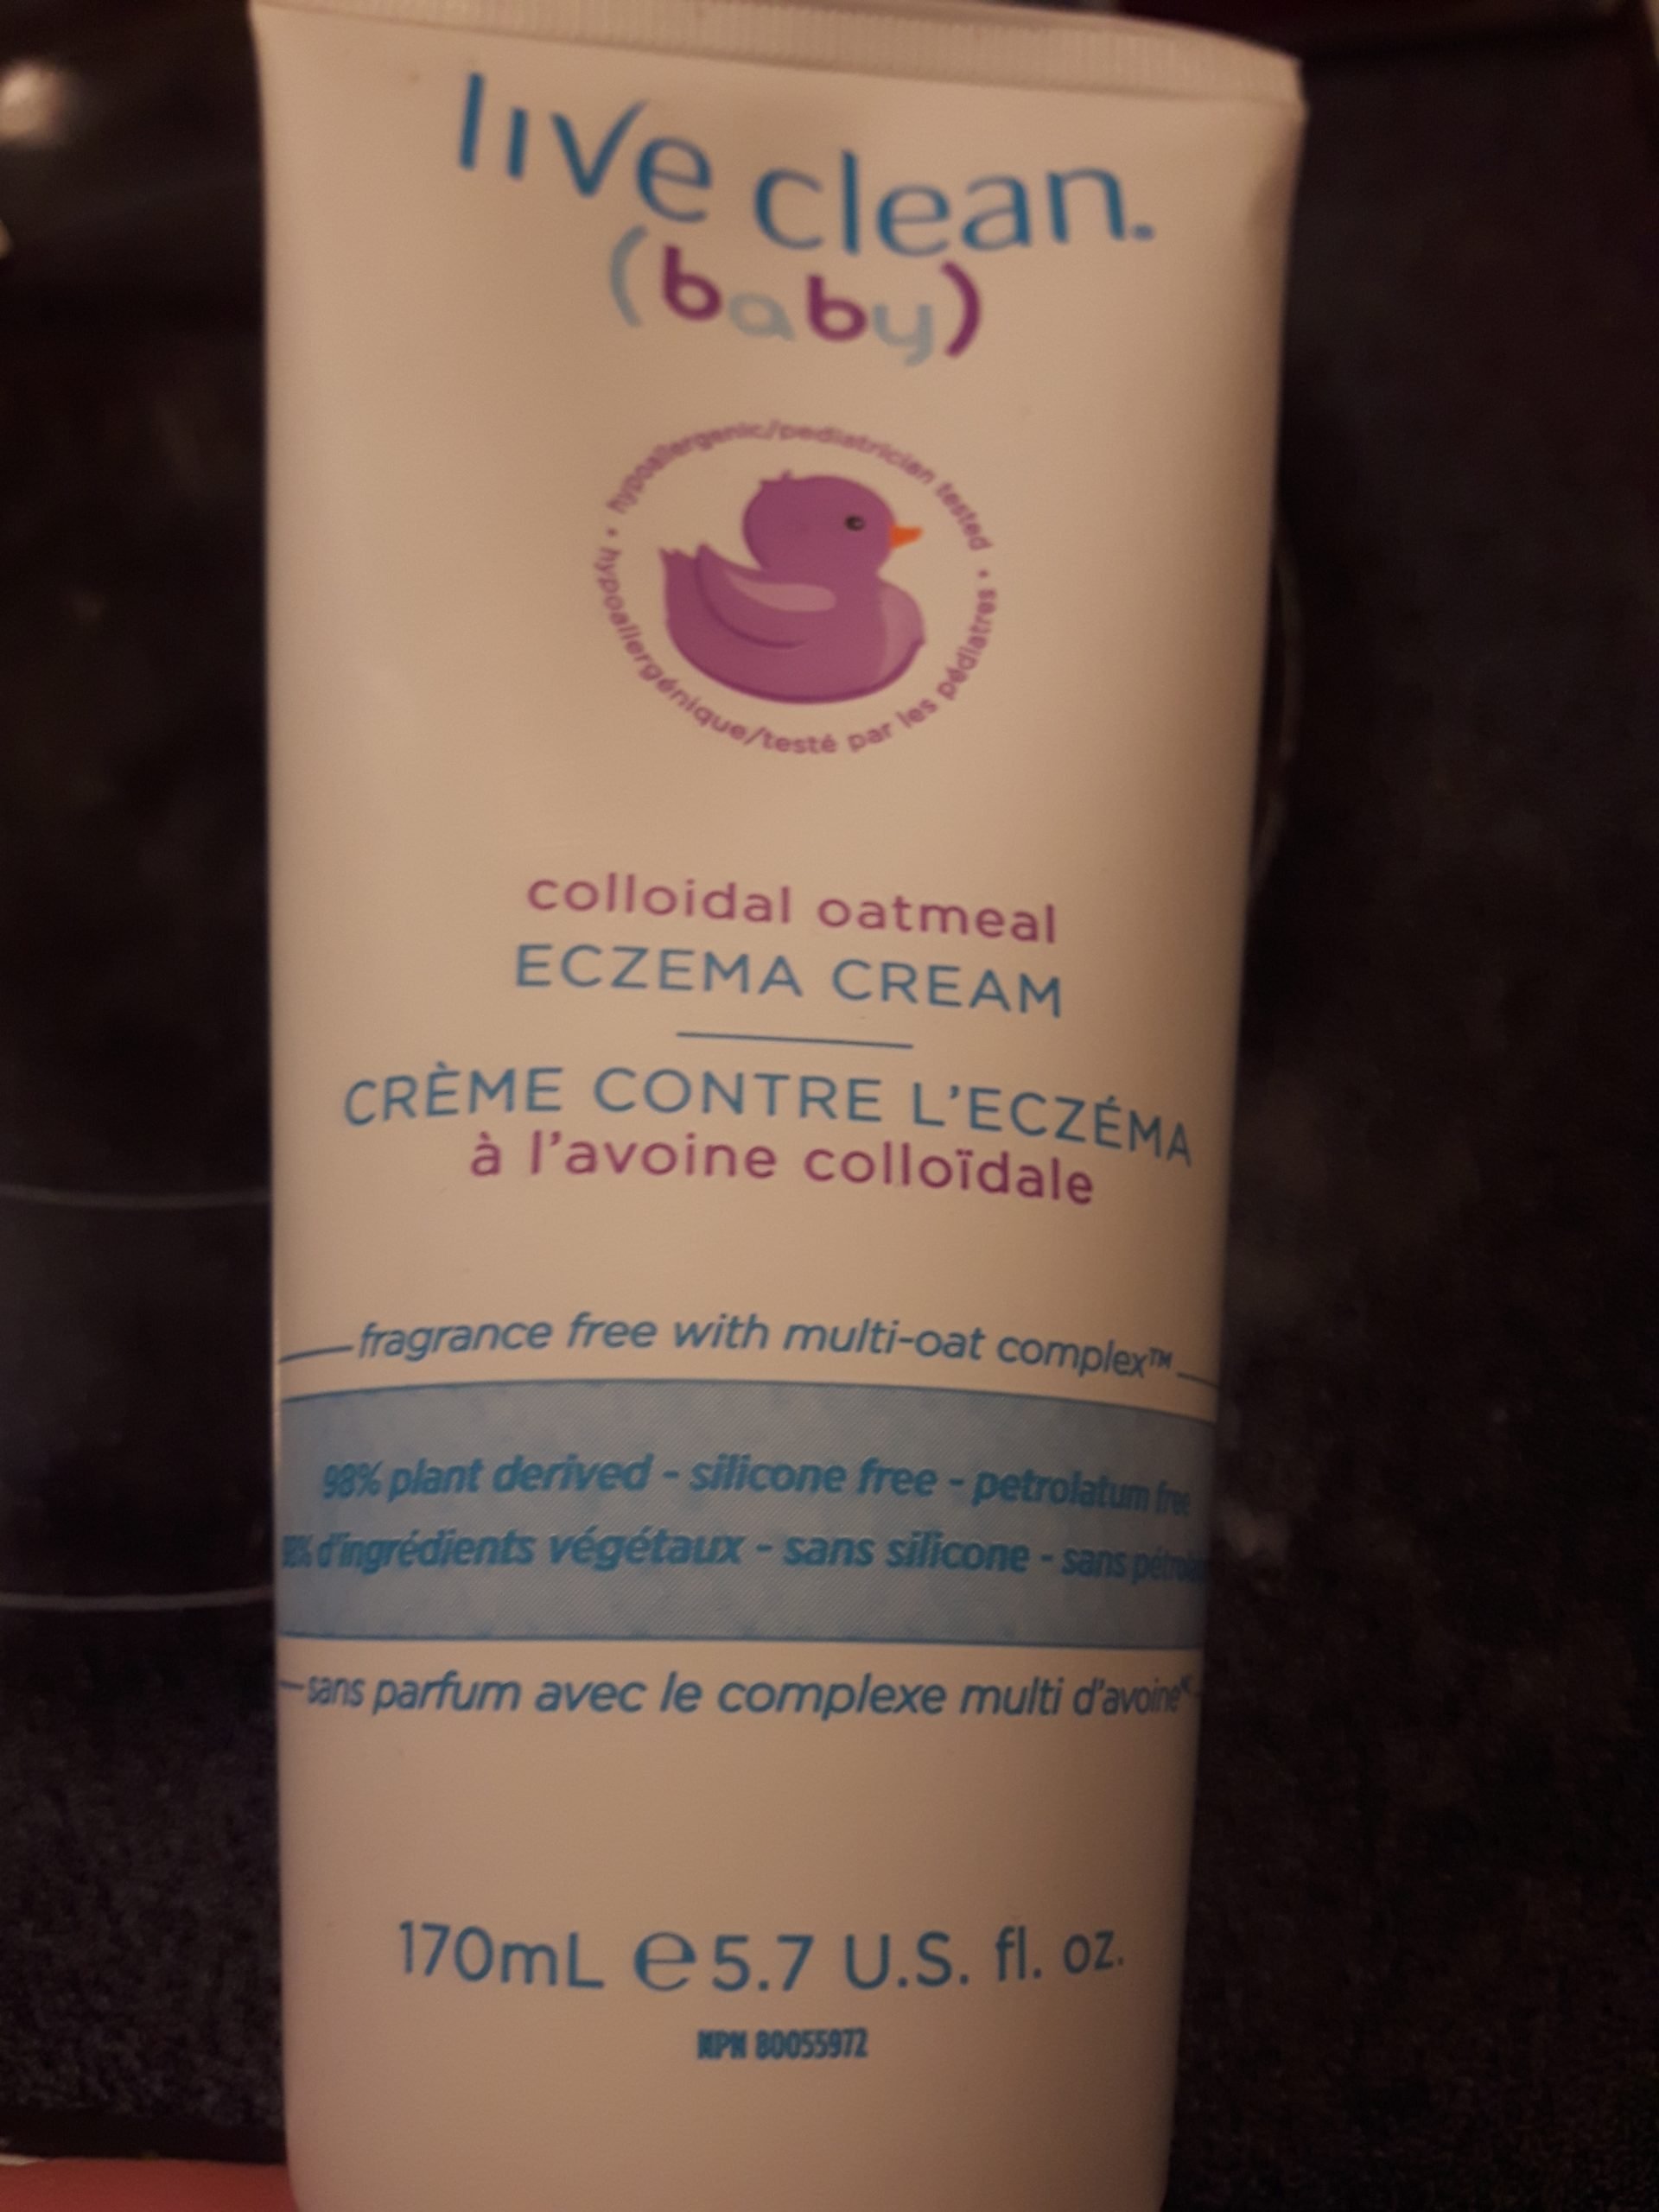 Live Clean (baby) Colloidal Oatmeal Eczema Cream reviews in Lotions ...